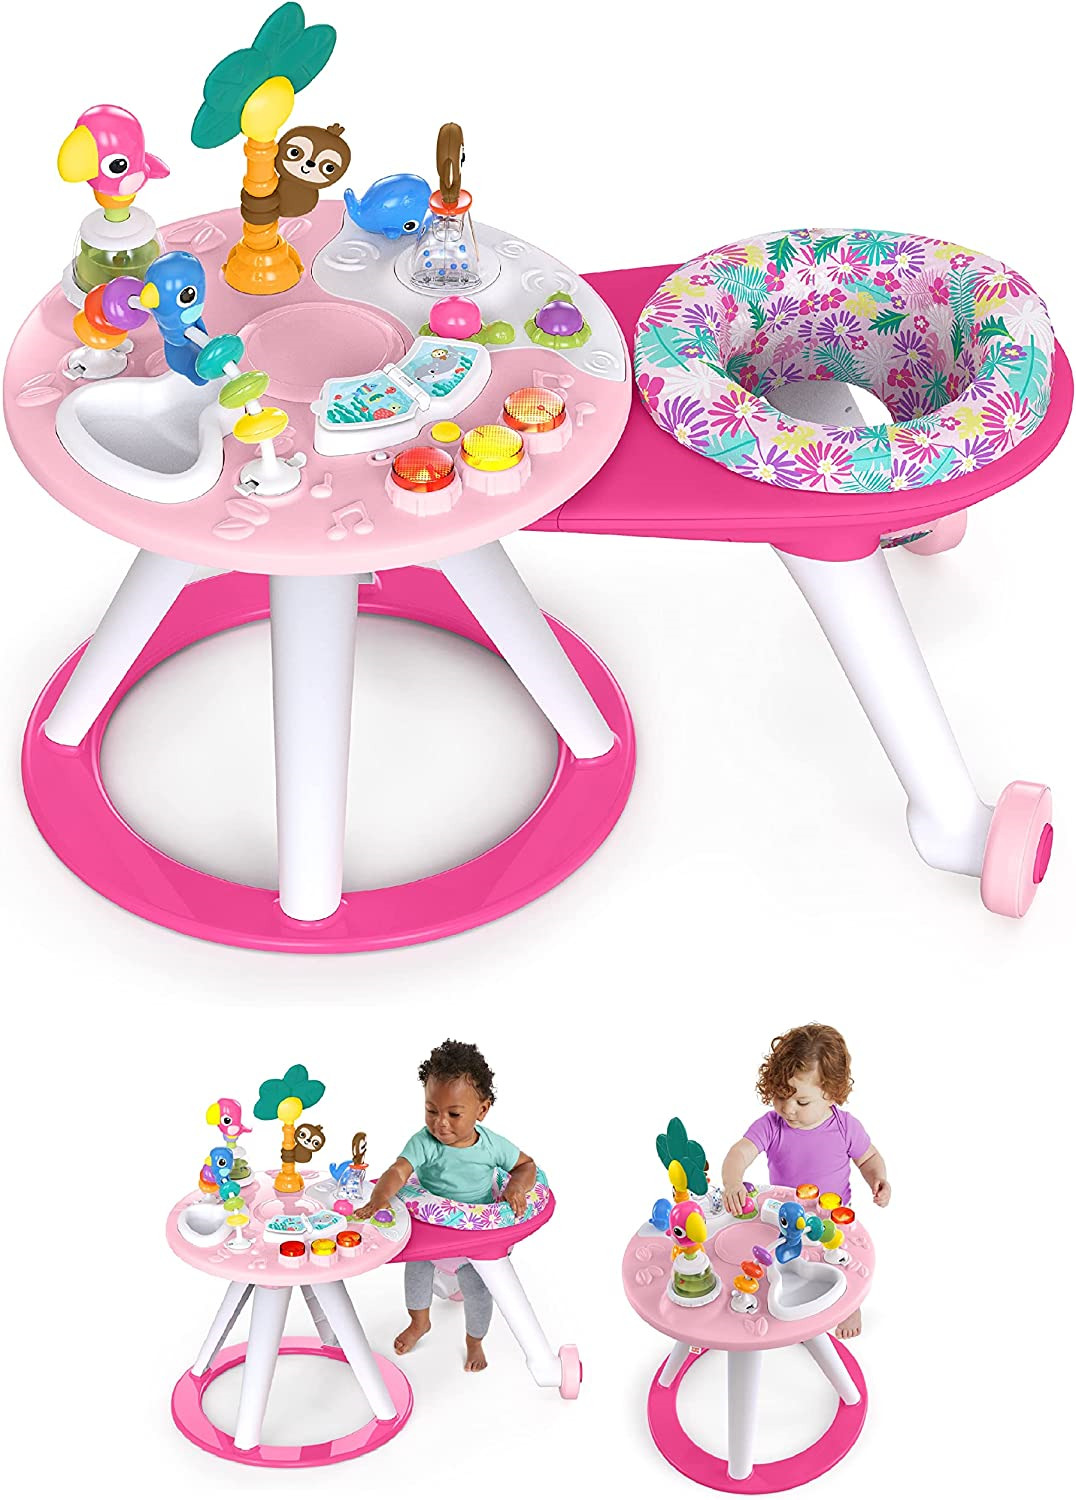 Bright Starts, Around We Go 2-in-1 Walk-Around Activity Center and Table - with